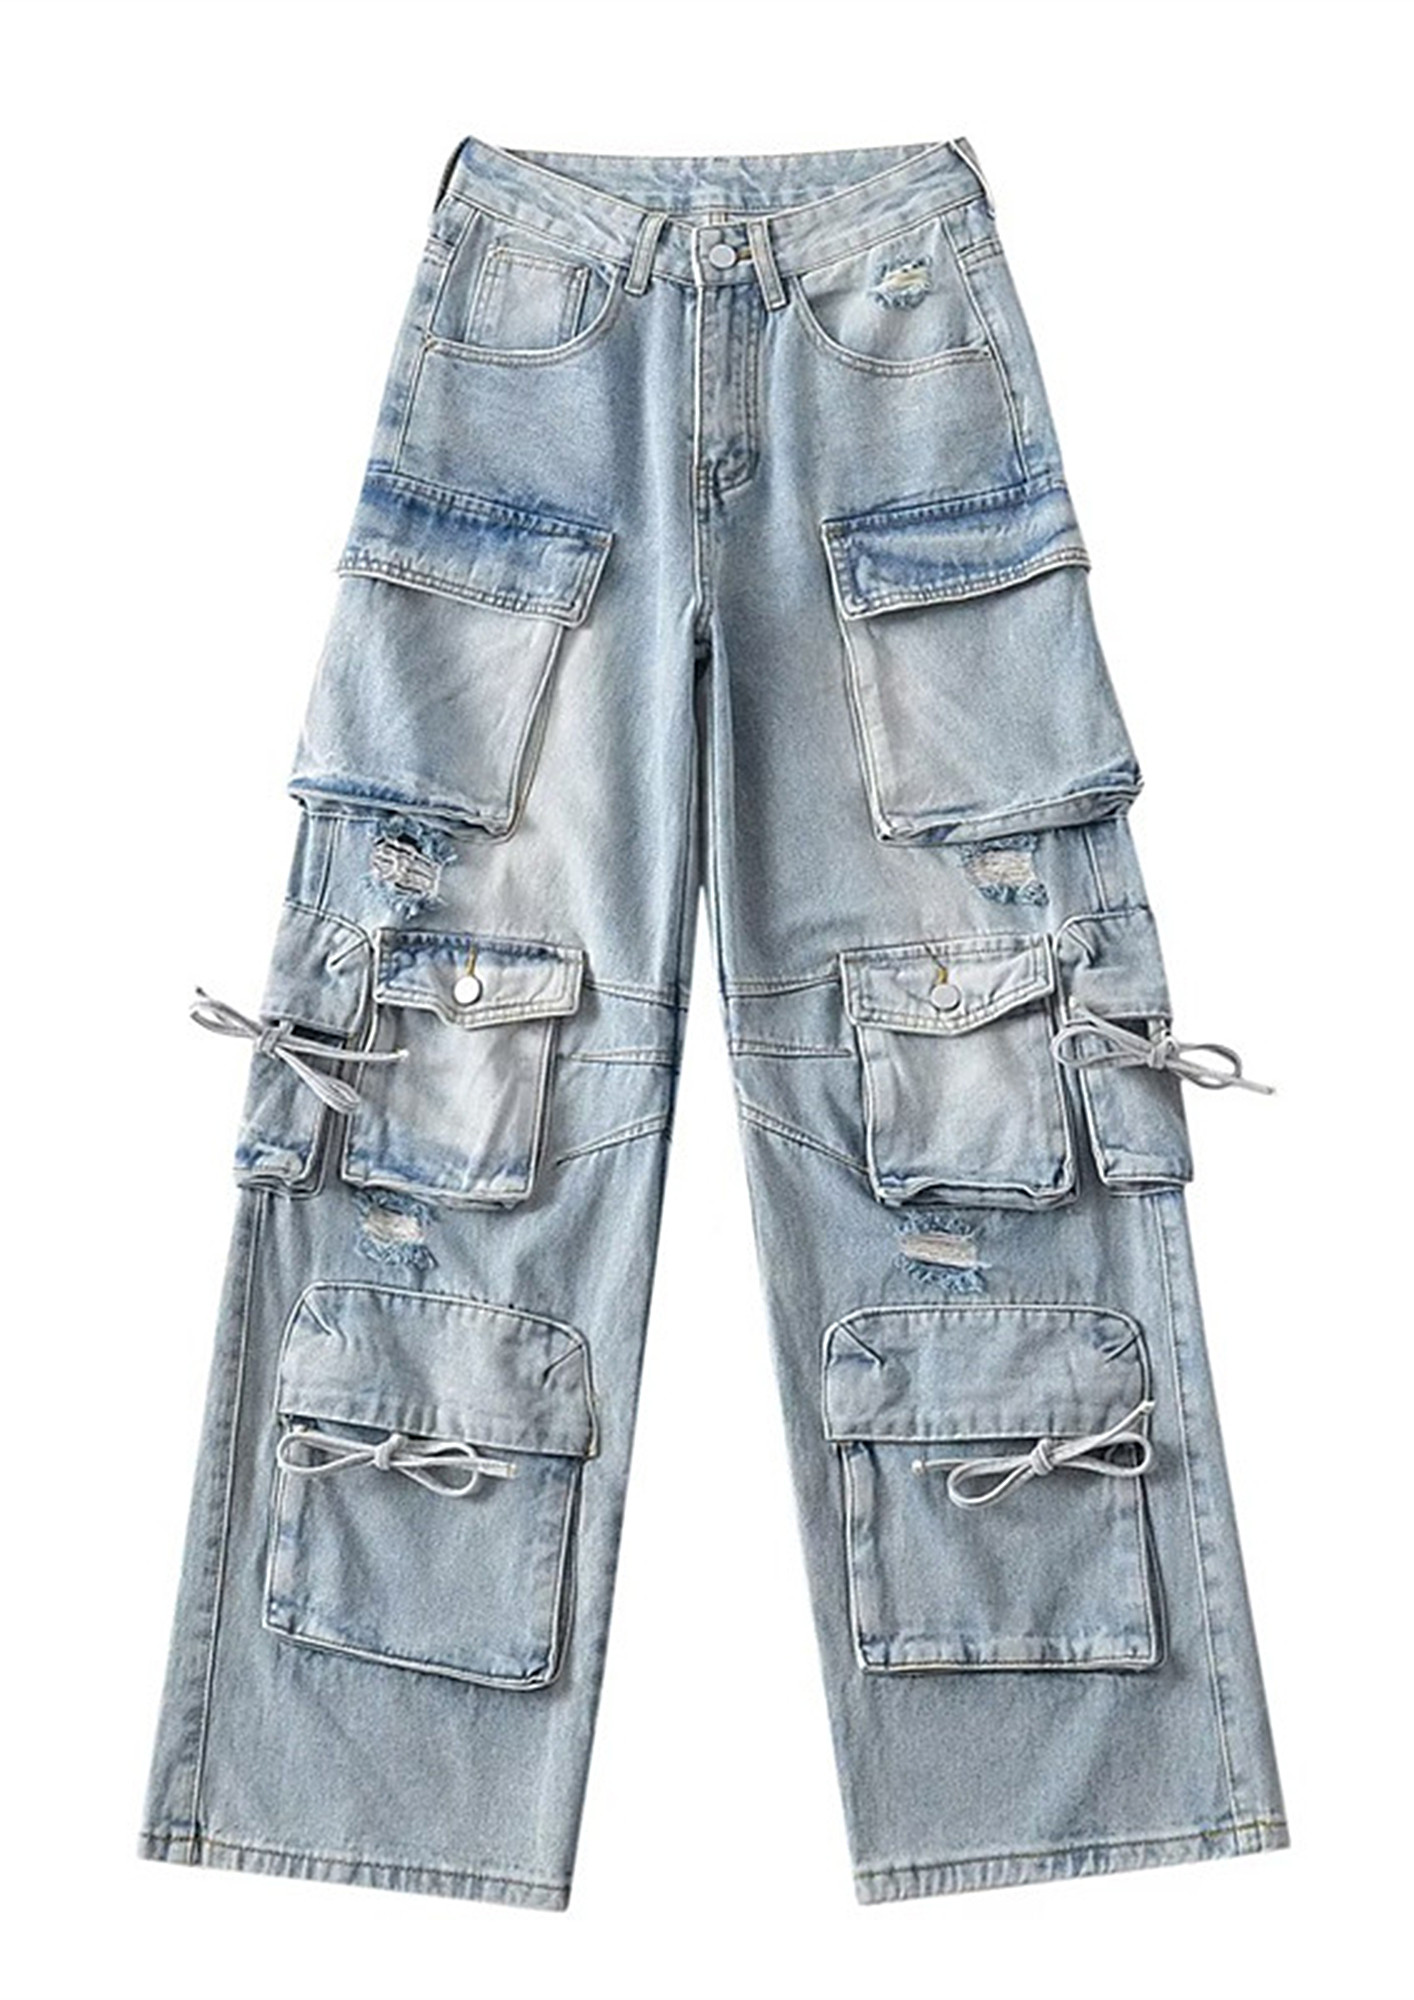 Whip stitched six pocket cargo denim – Perfectstore4beauties